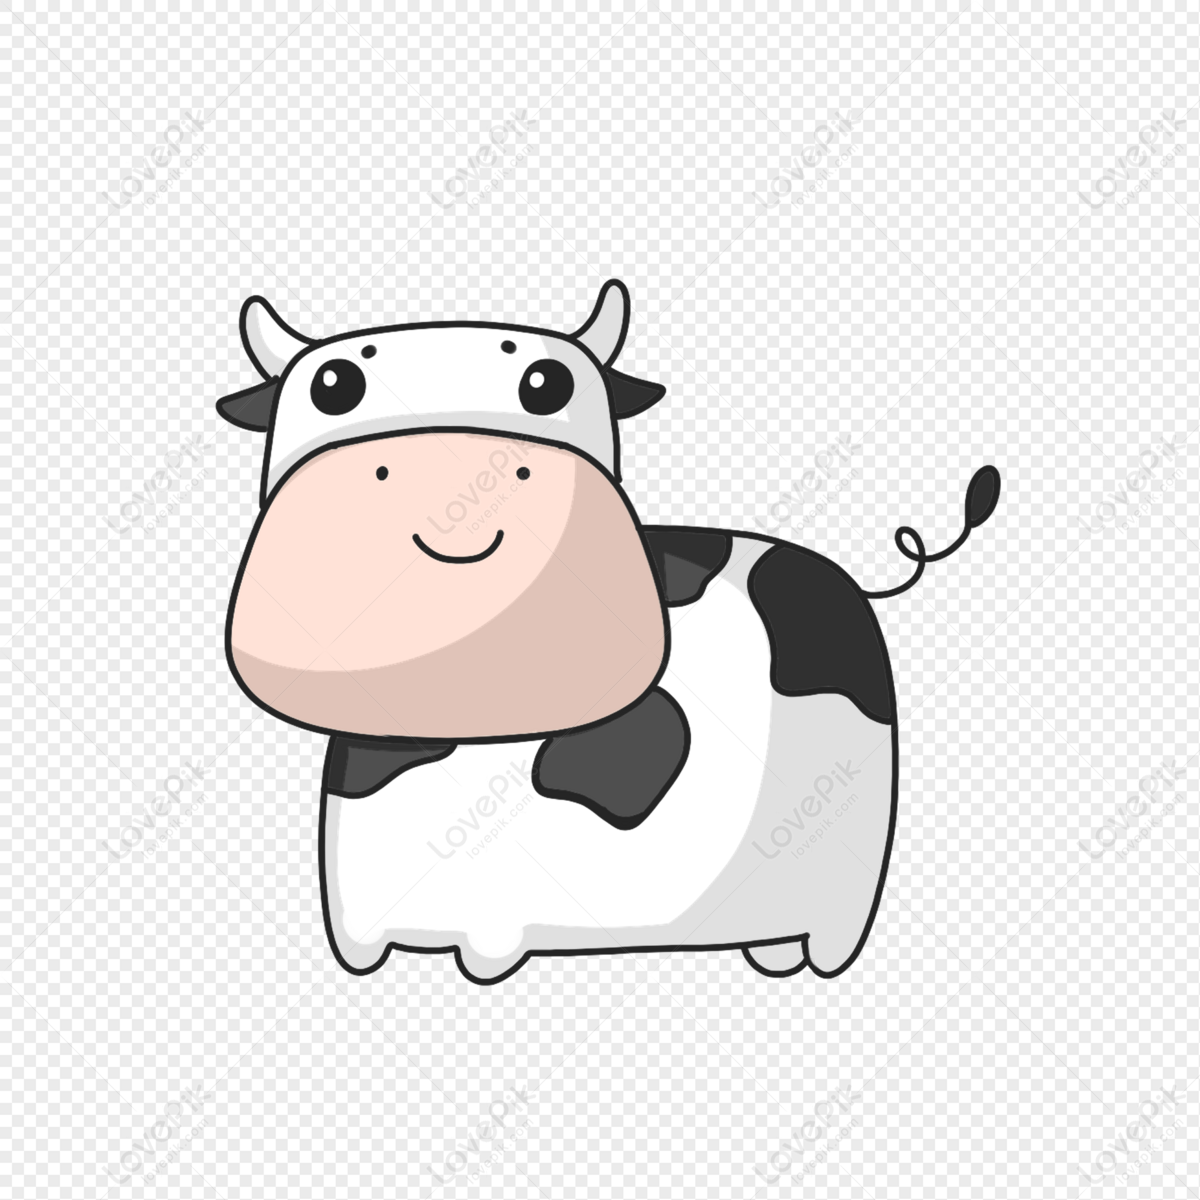 Cartoon Cow PNG Hd Transparent Image And Clipart Image For Free Download -  Lovepik | 401734724